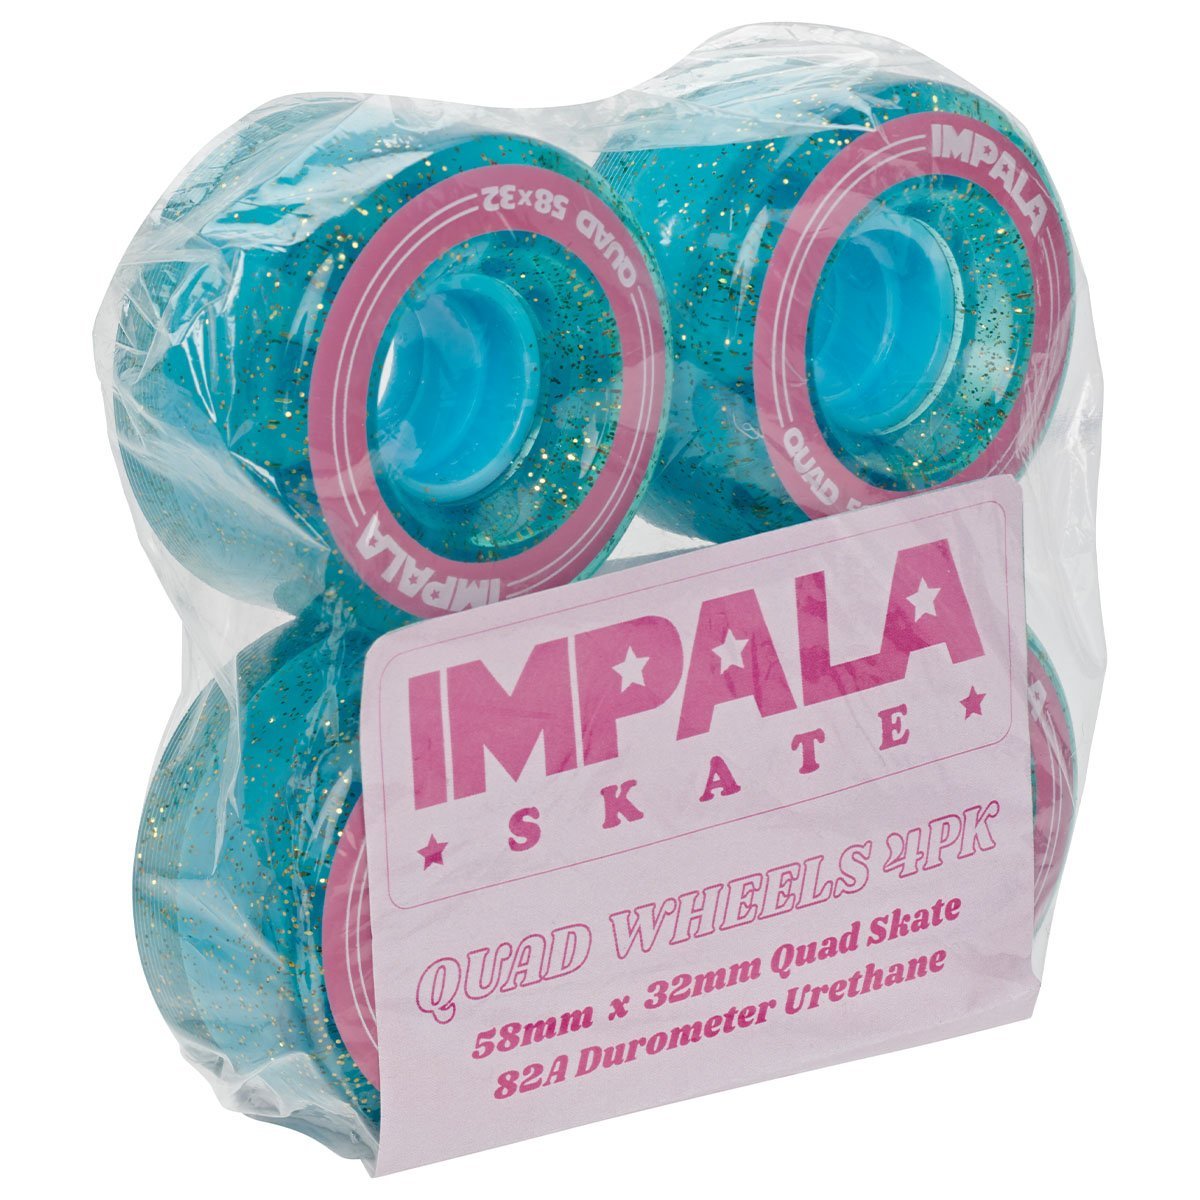 IMPALA - Holographic Glitter 58mm/82a Roller Skate Wheels